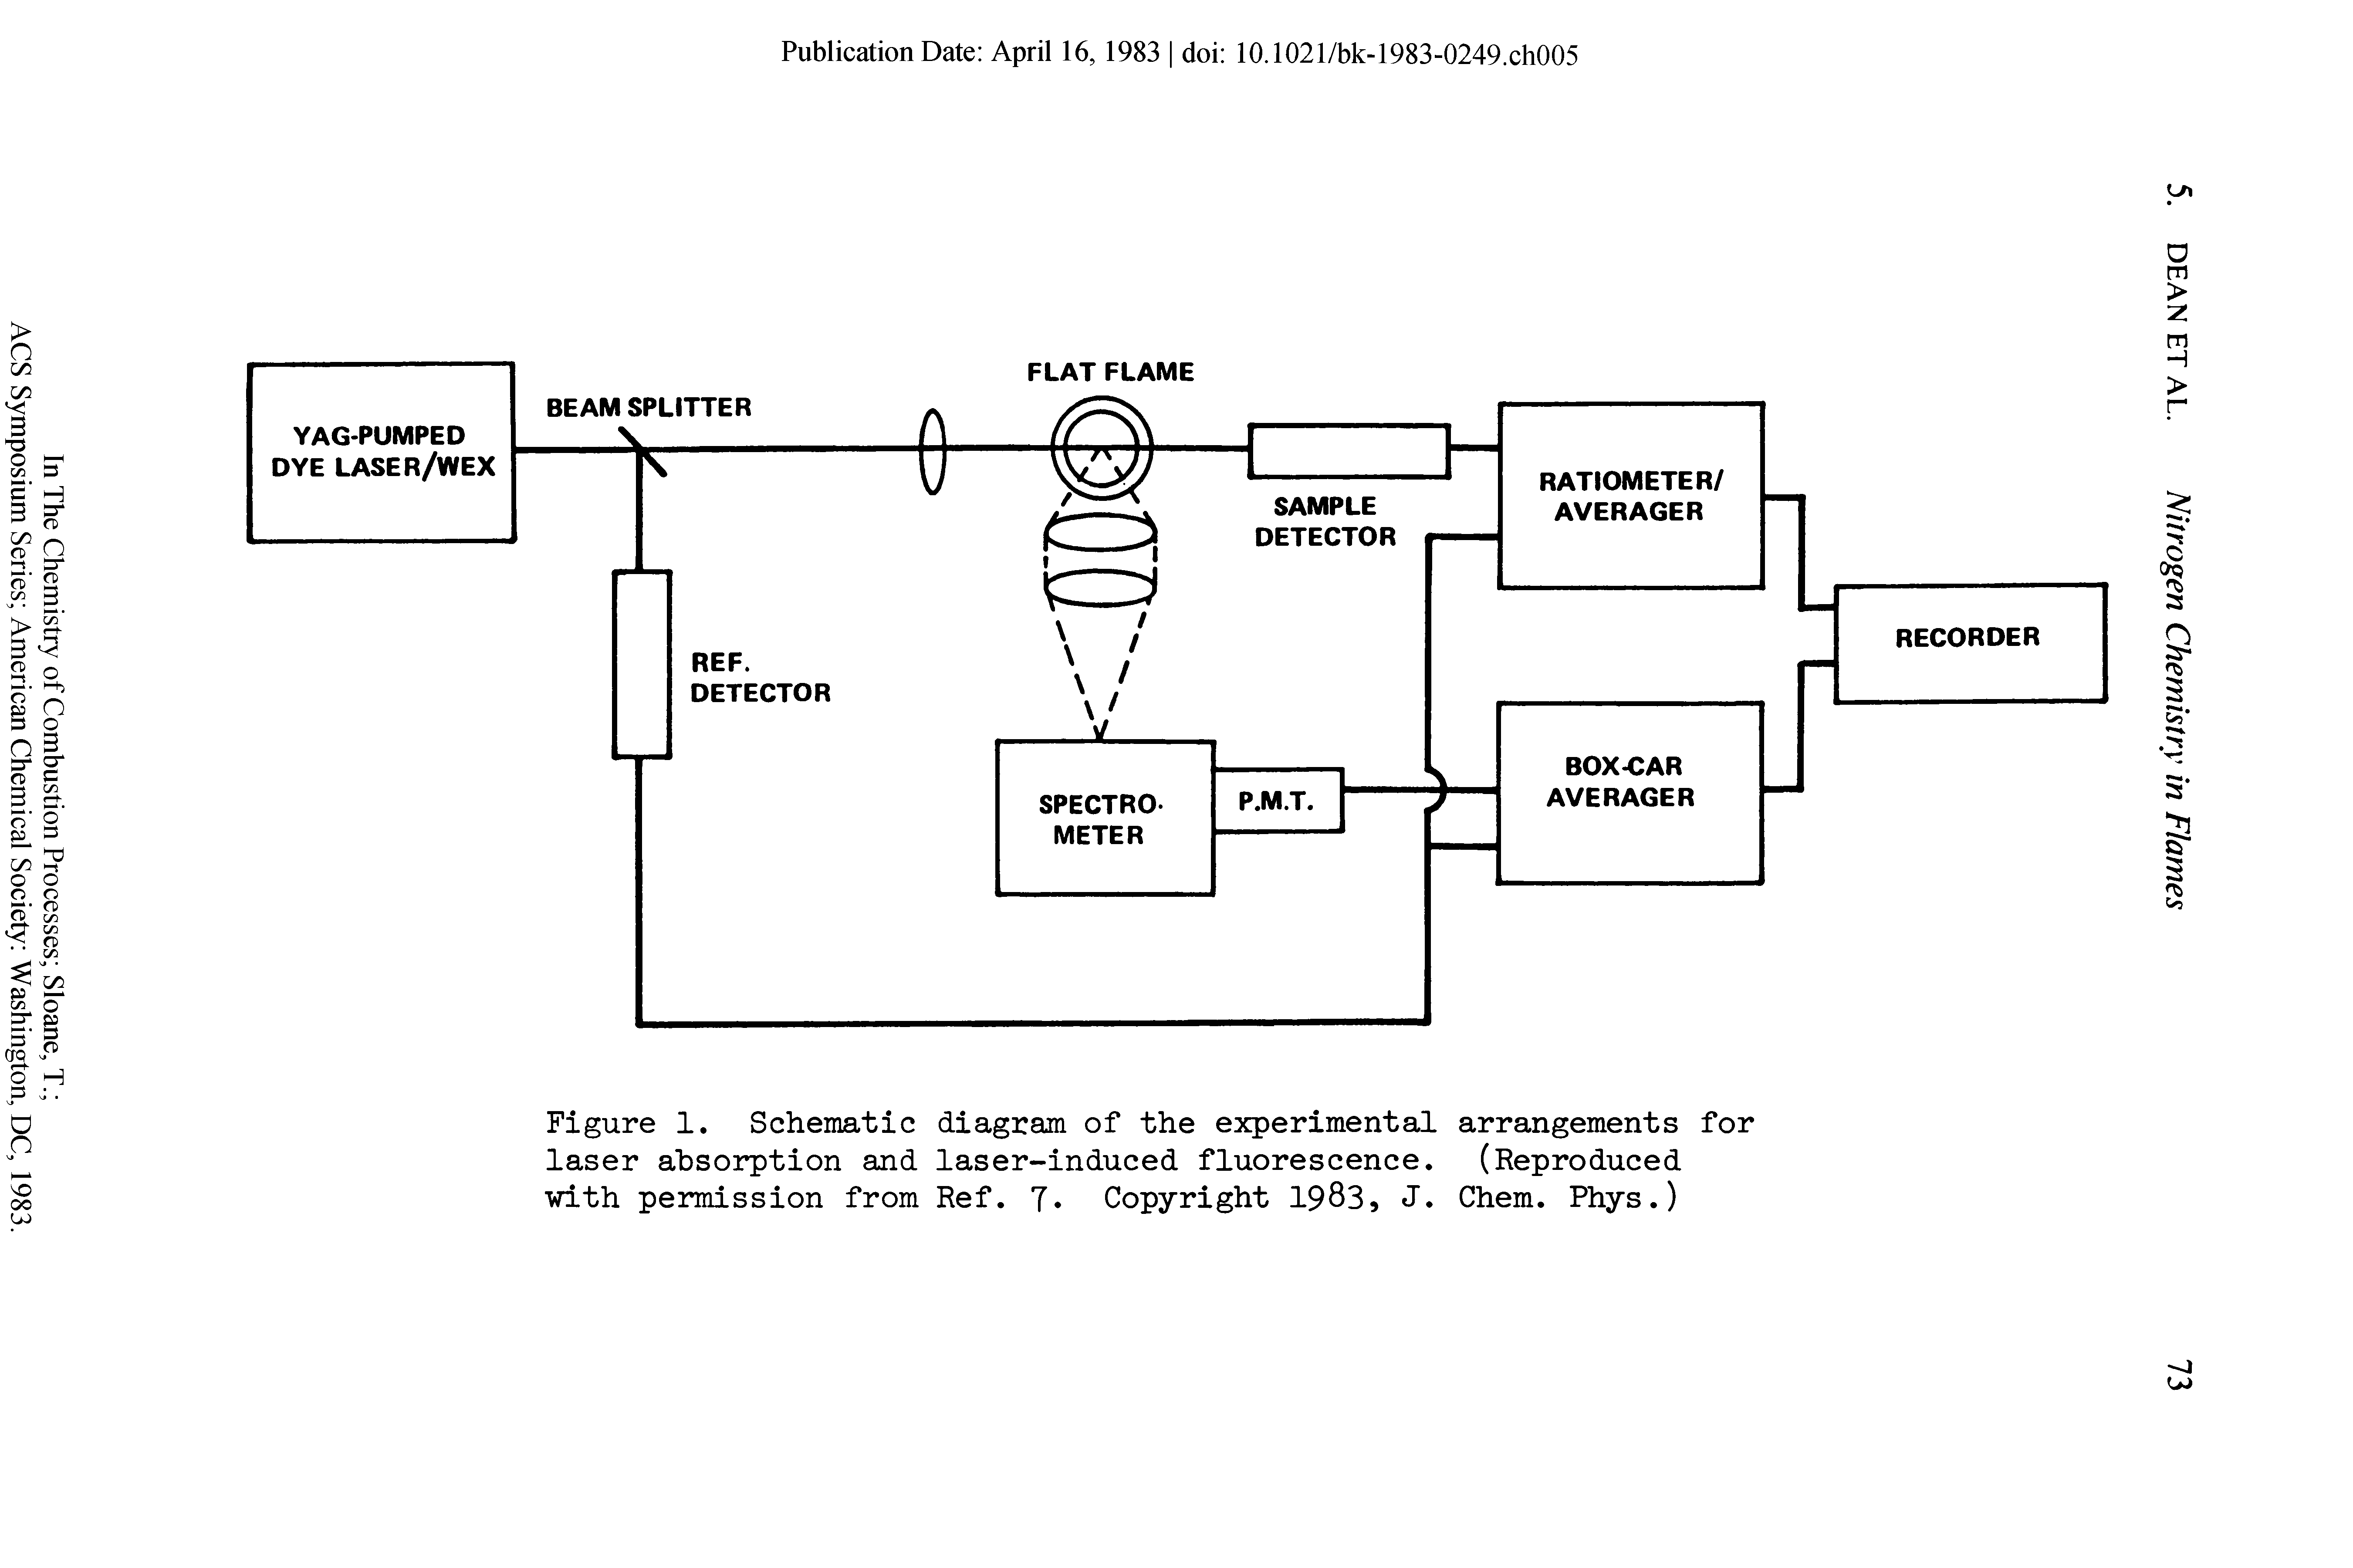 Figure 1. Schematic diagram of the experimental arrangements for laser absorption and laser-induced fluorescence. (Reproduced with permission from Ref. 7 Copyright 1983, J. Chem. Phys.)...